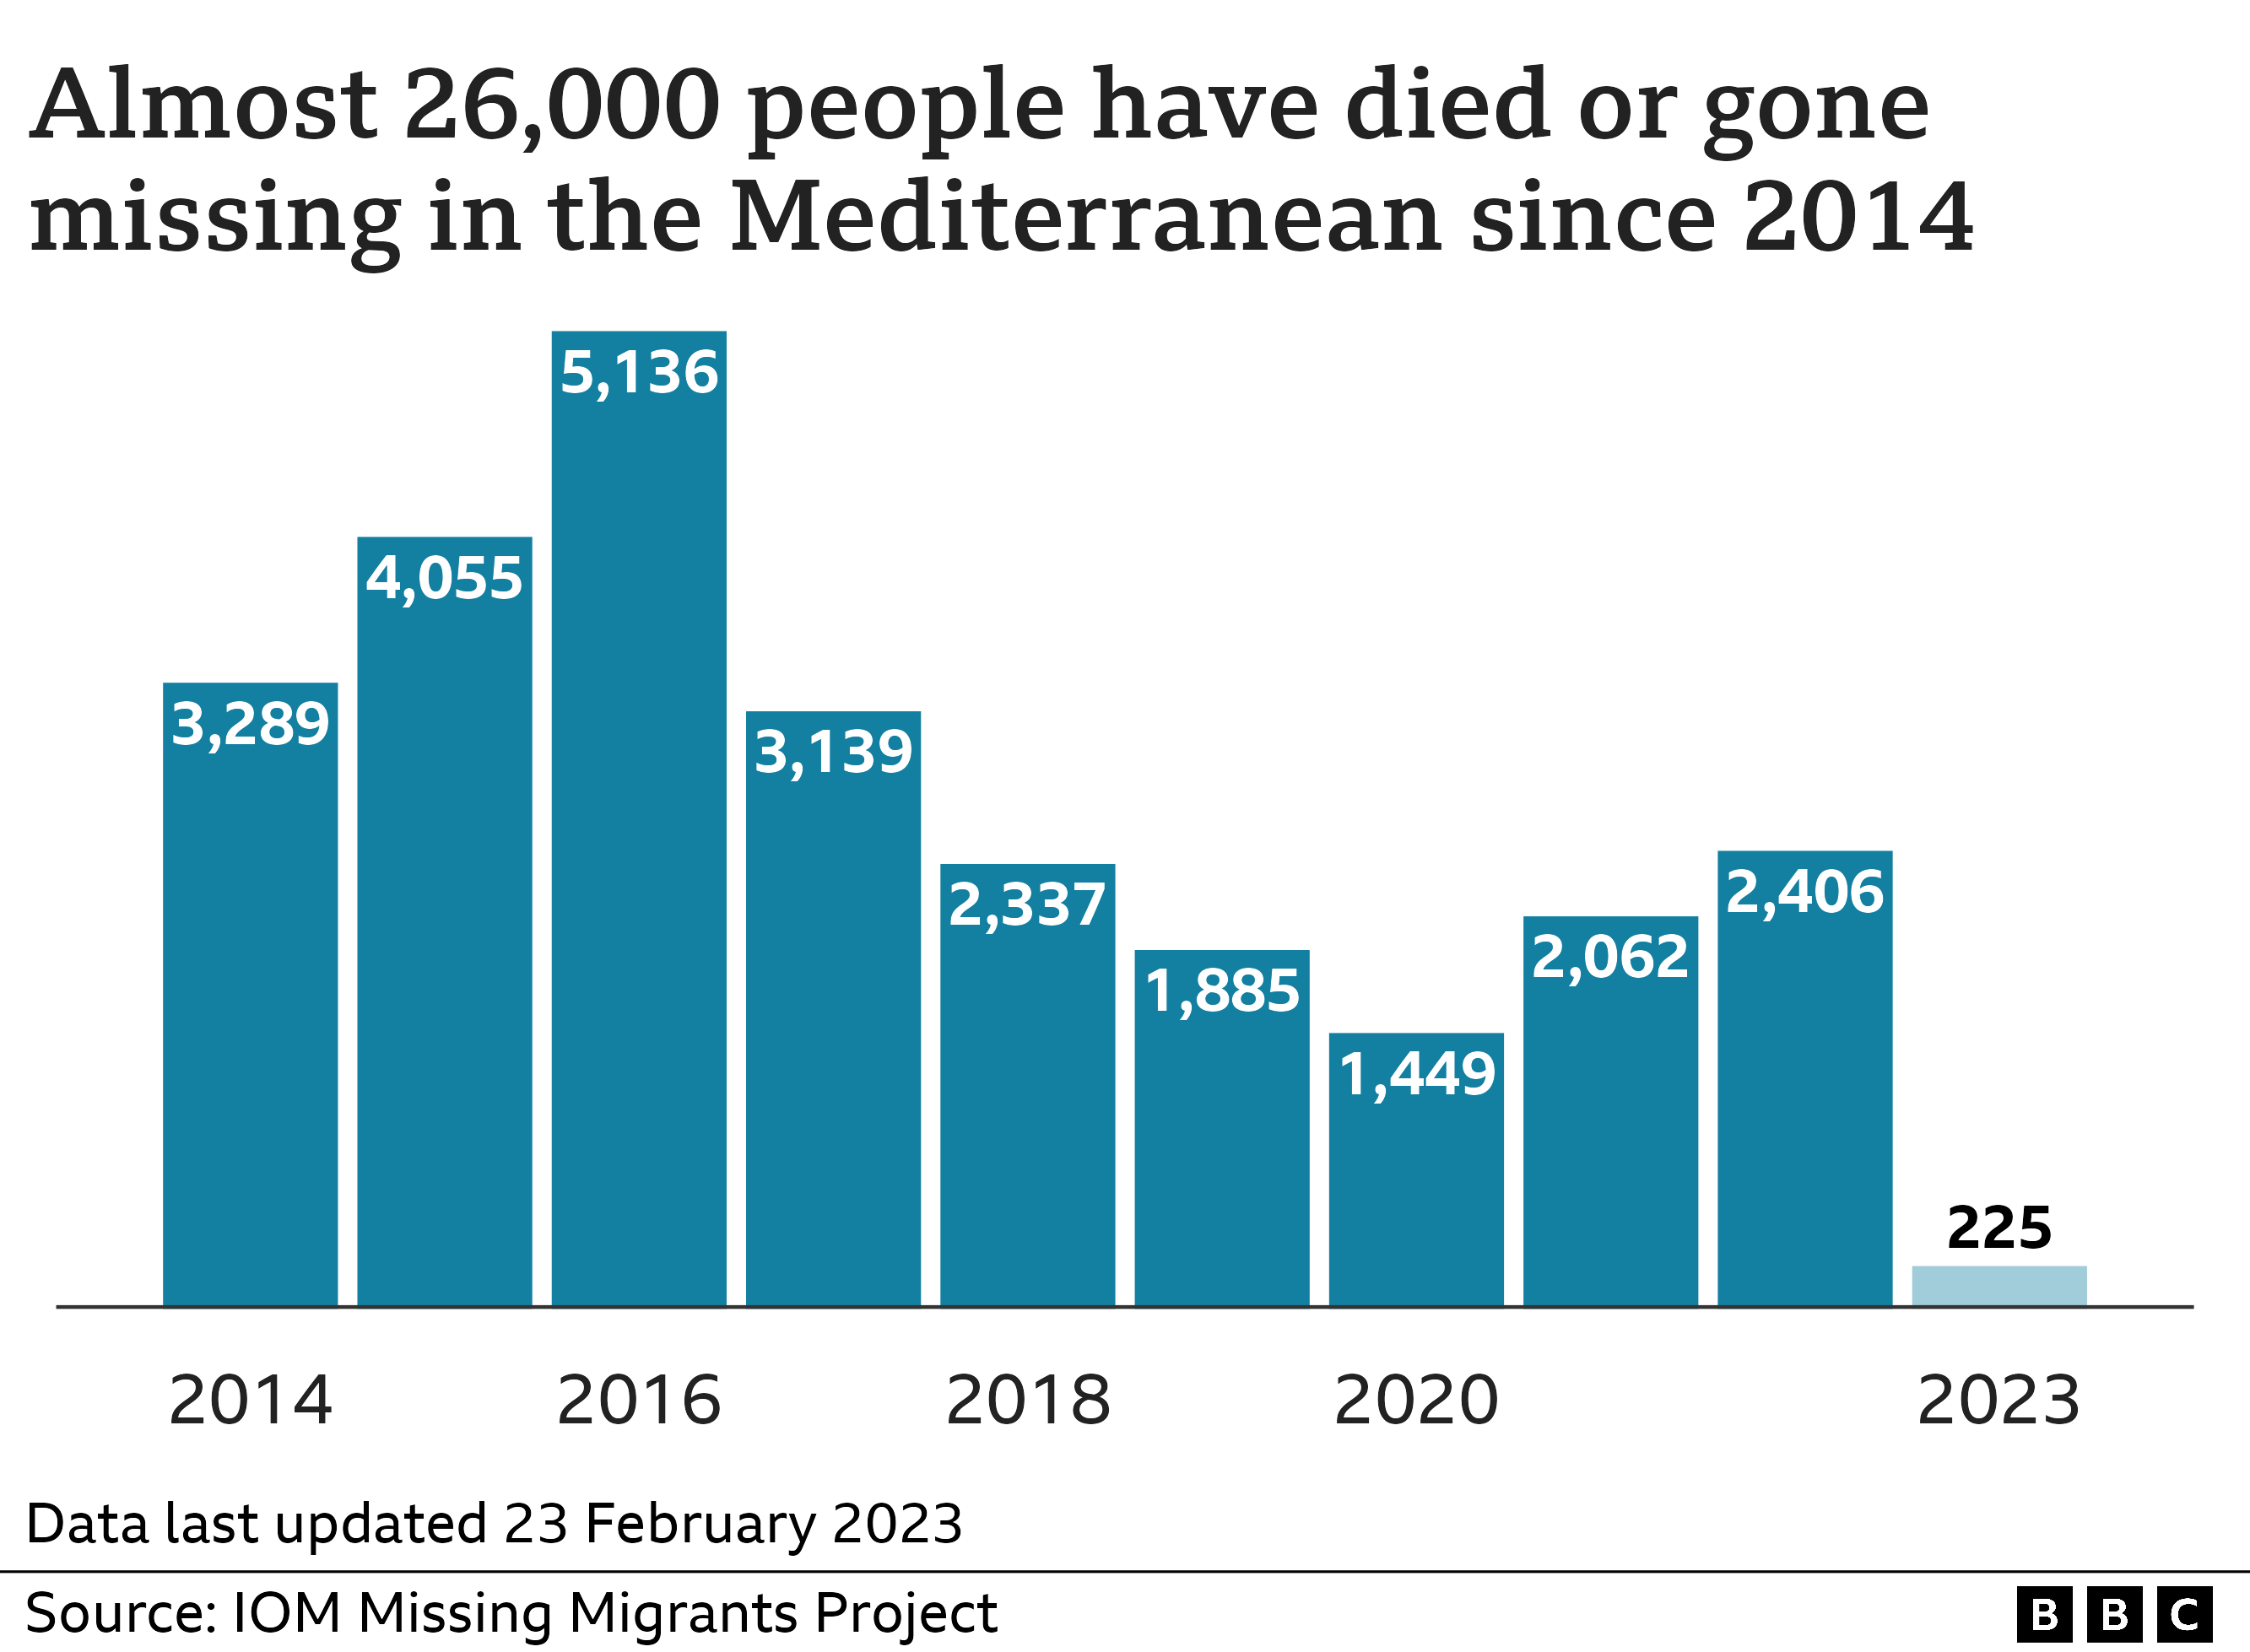 Graphic showing number of deaths in the Mediterranean since 2014